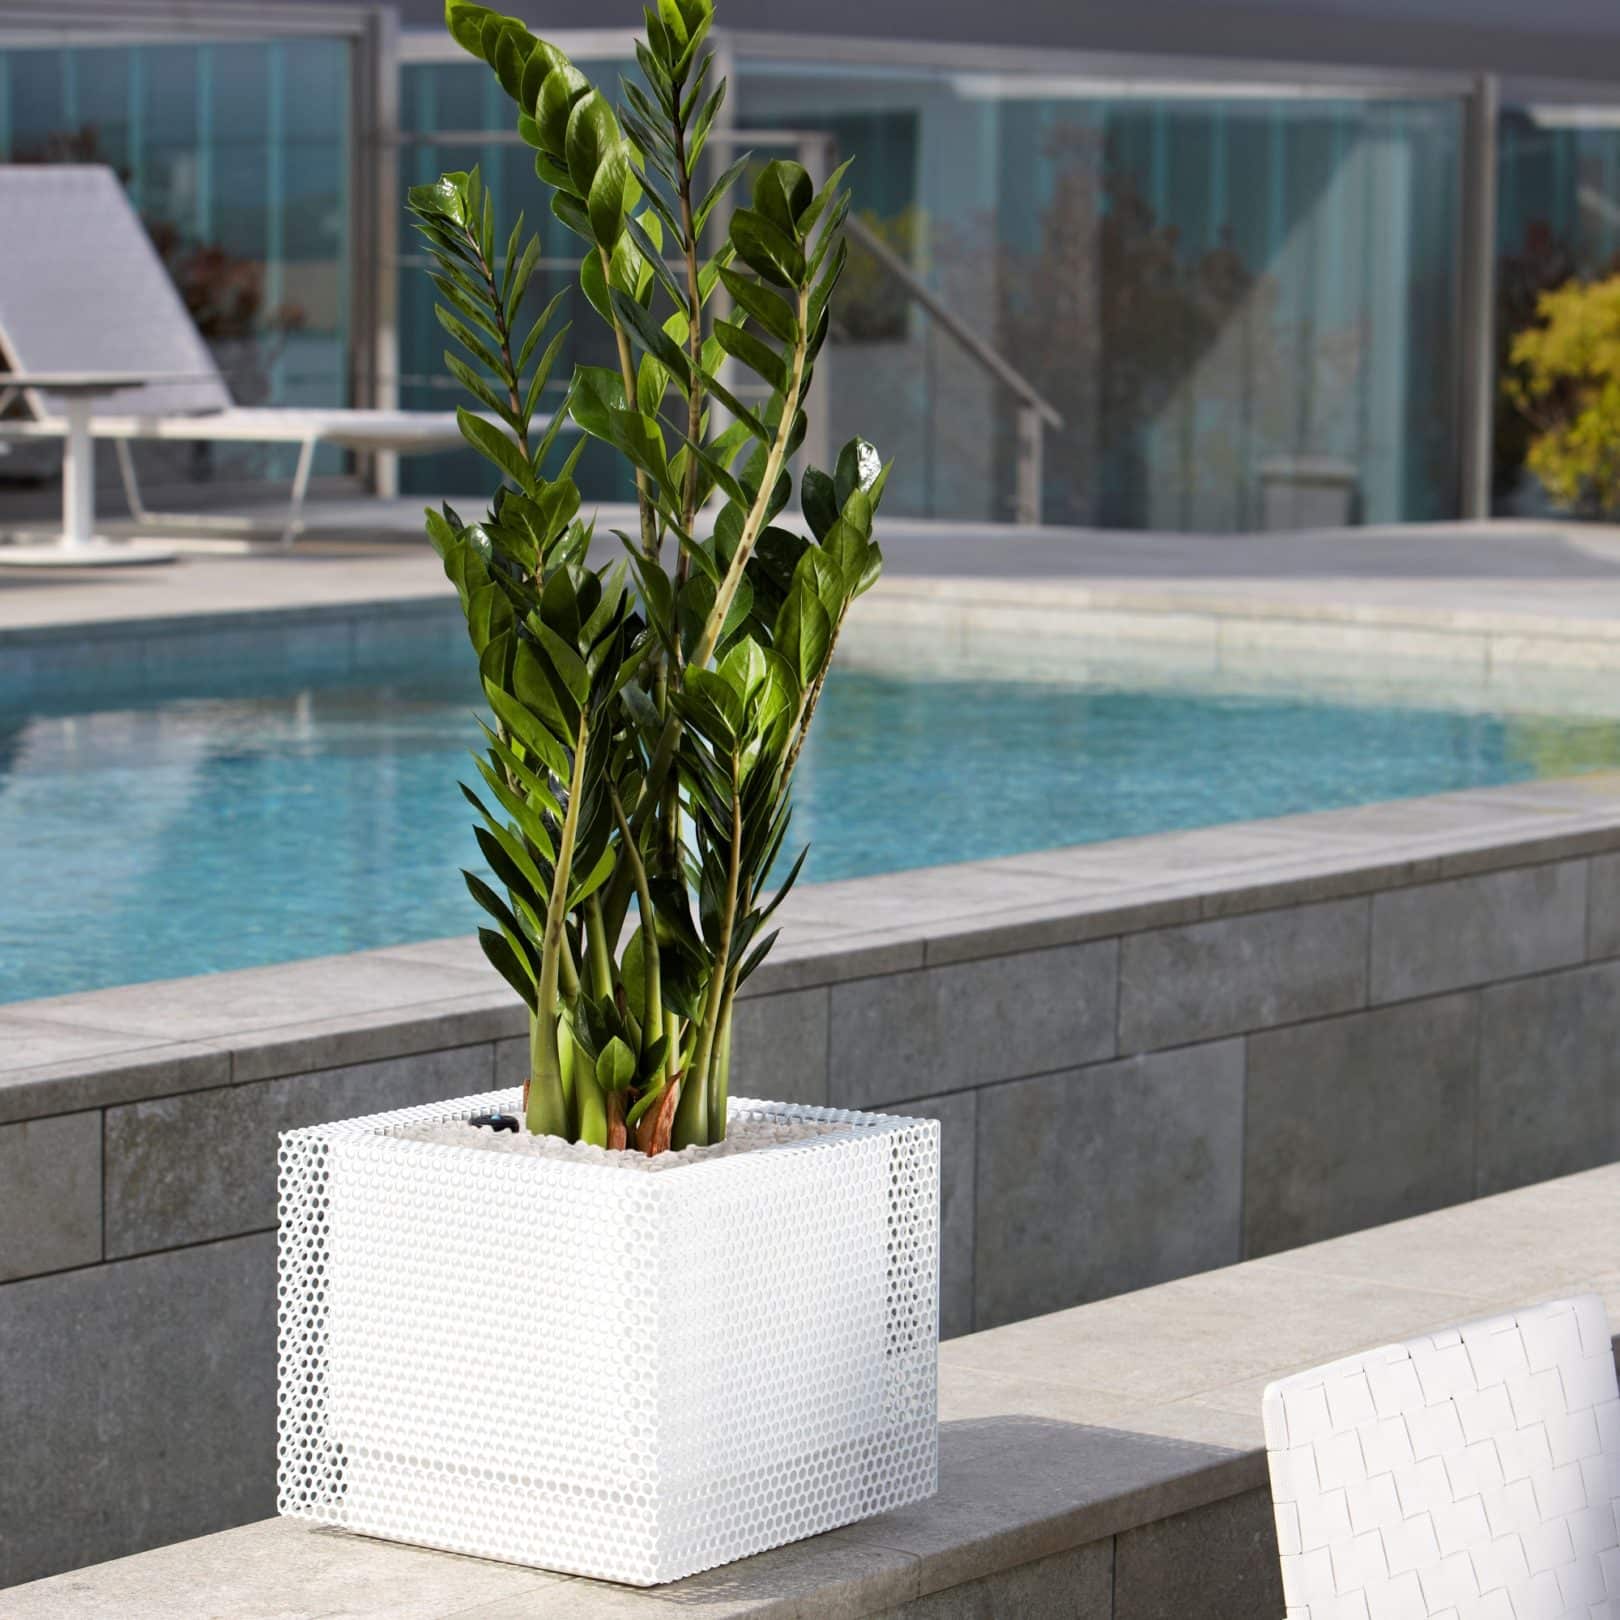 Ferrum Perforated Square Low planter in white in pool area